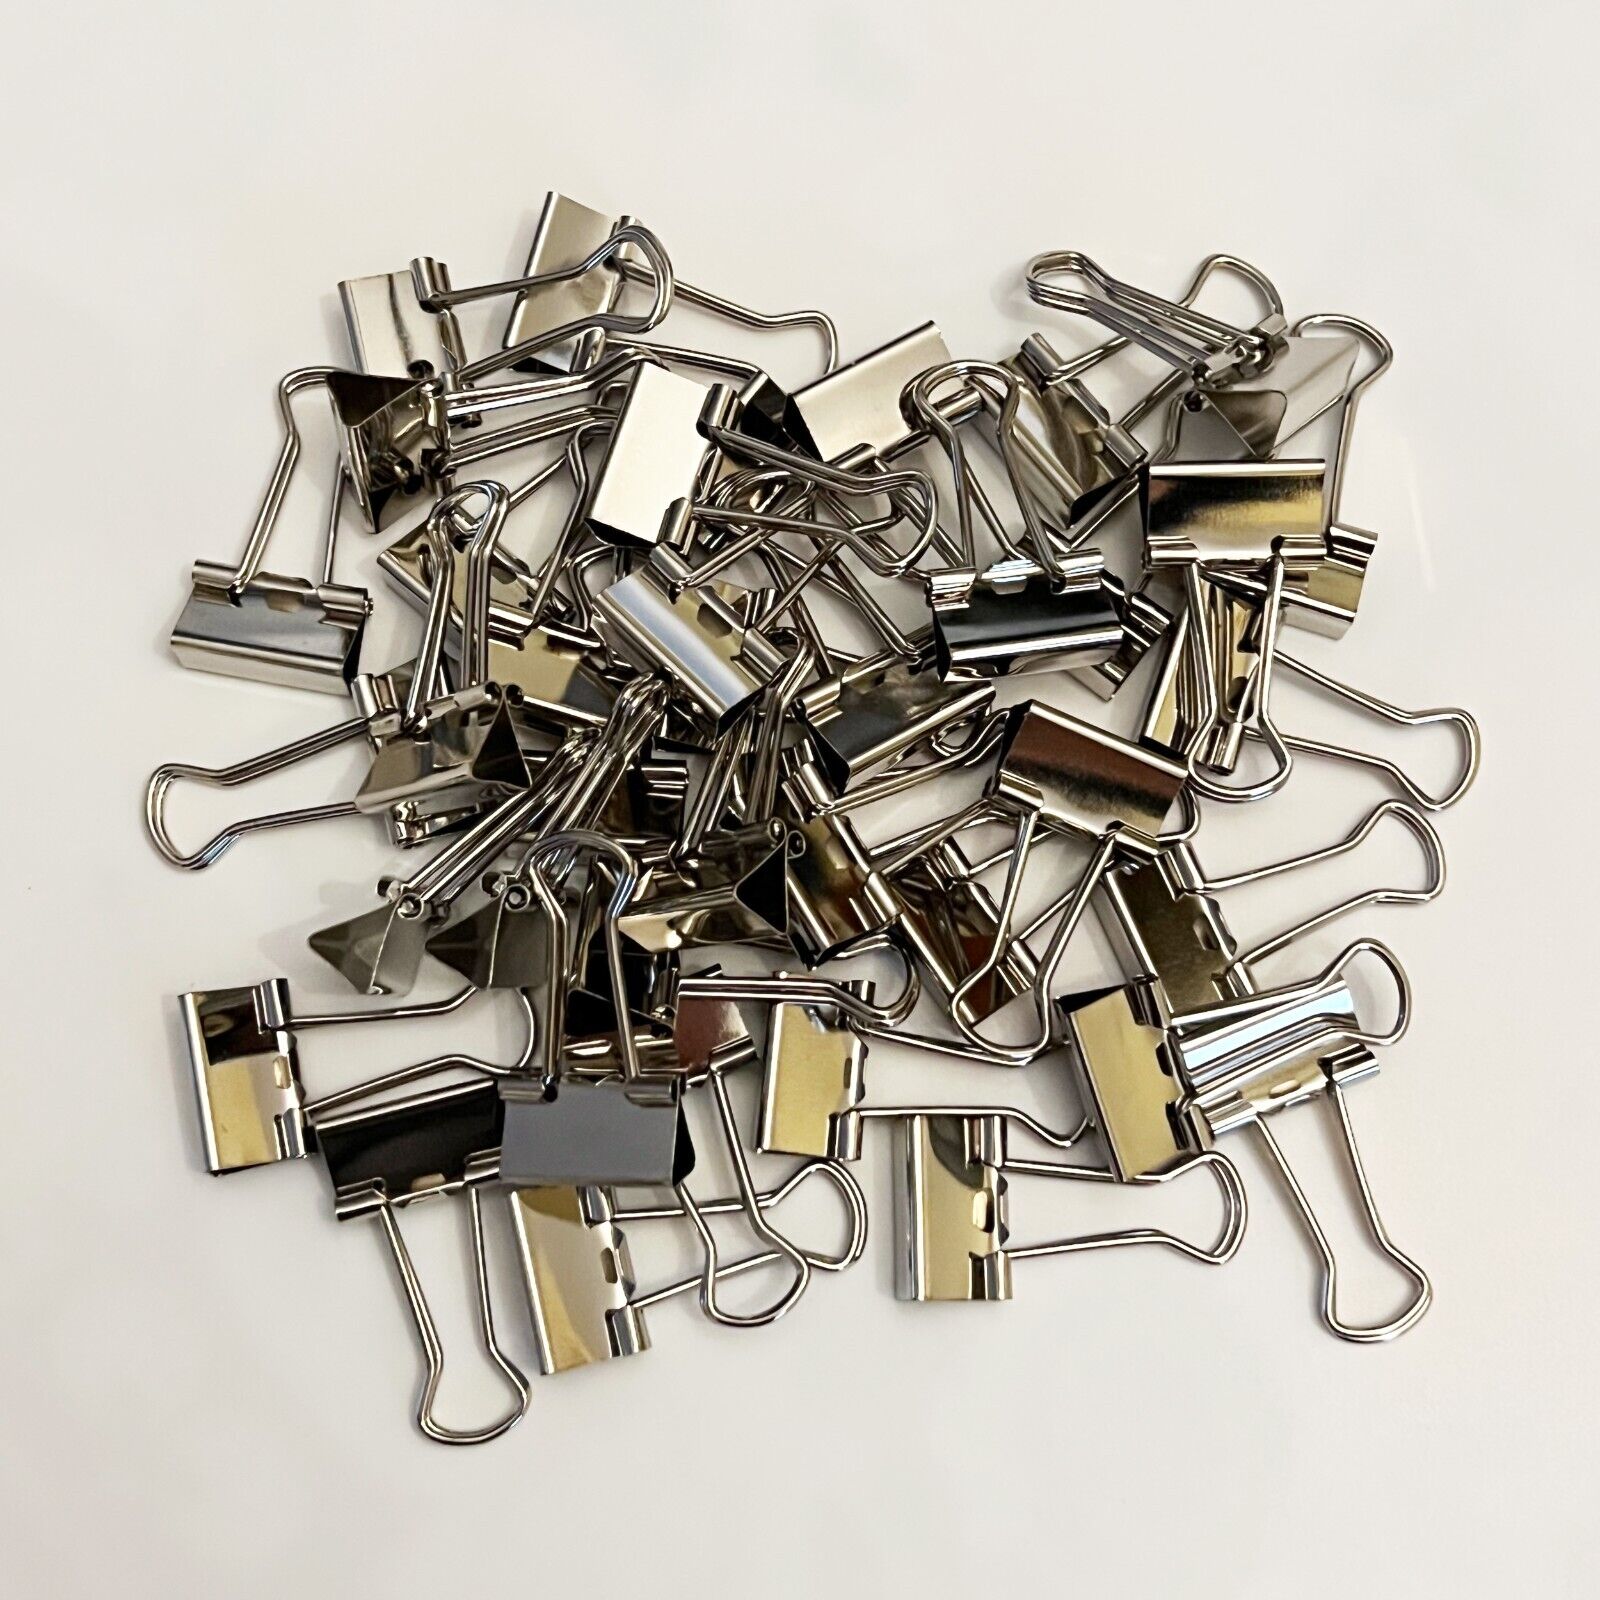 Small Binder Clips, Silver, Horizontal width 3/4INCH, Small Metal Paper Clamp